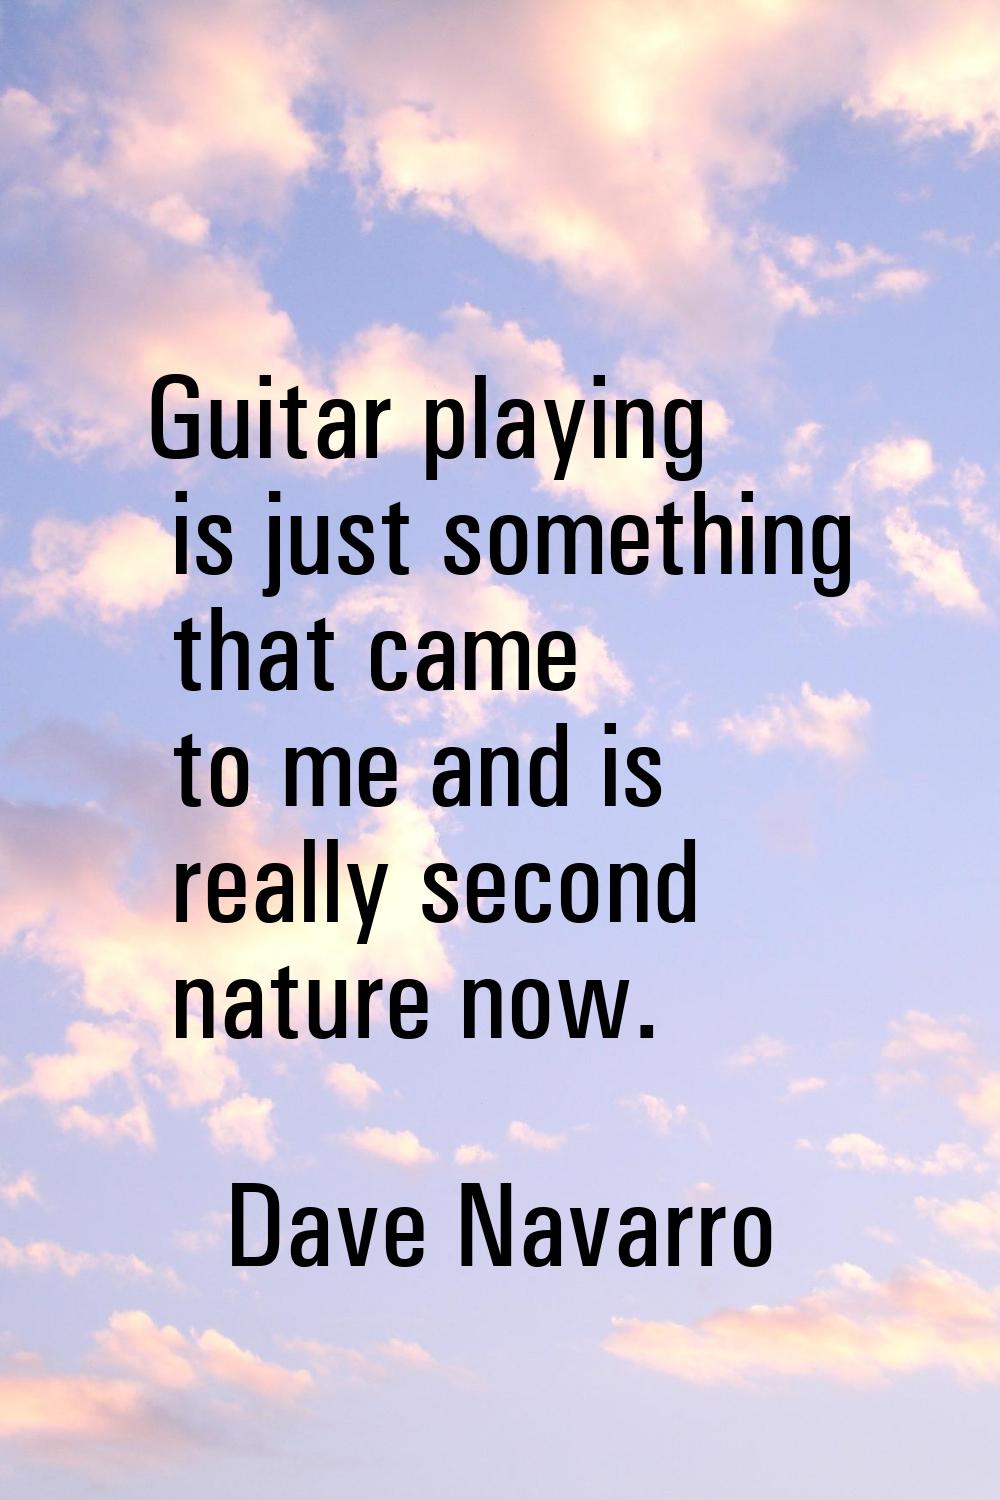 Guitar playing is just something that came to me and is really second nature now.